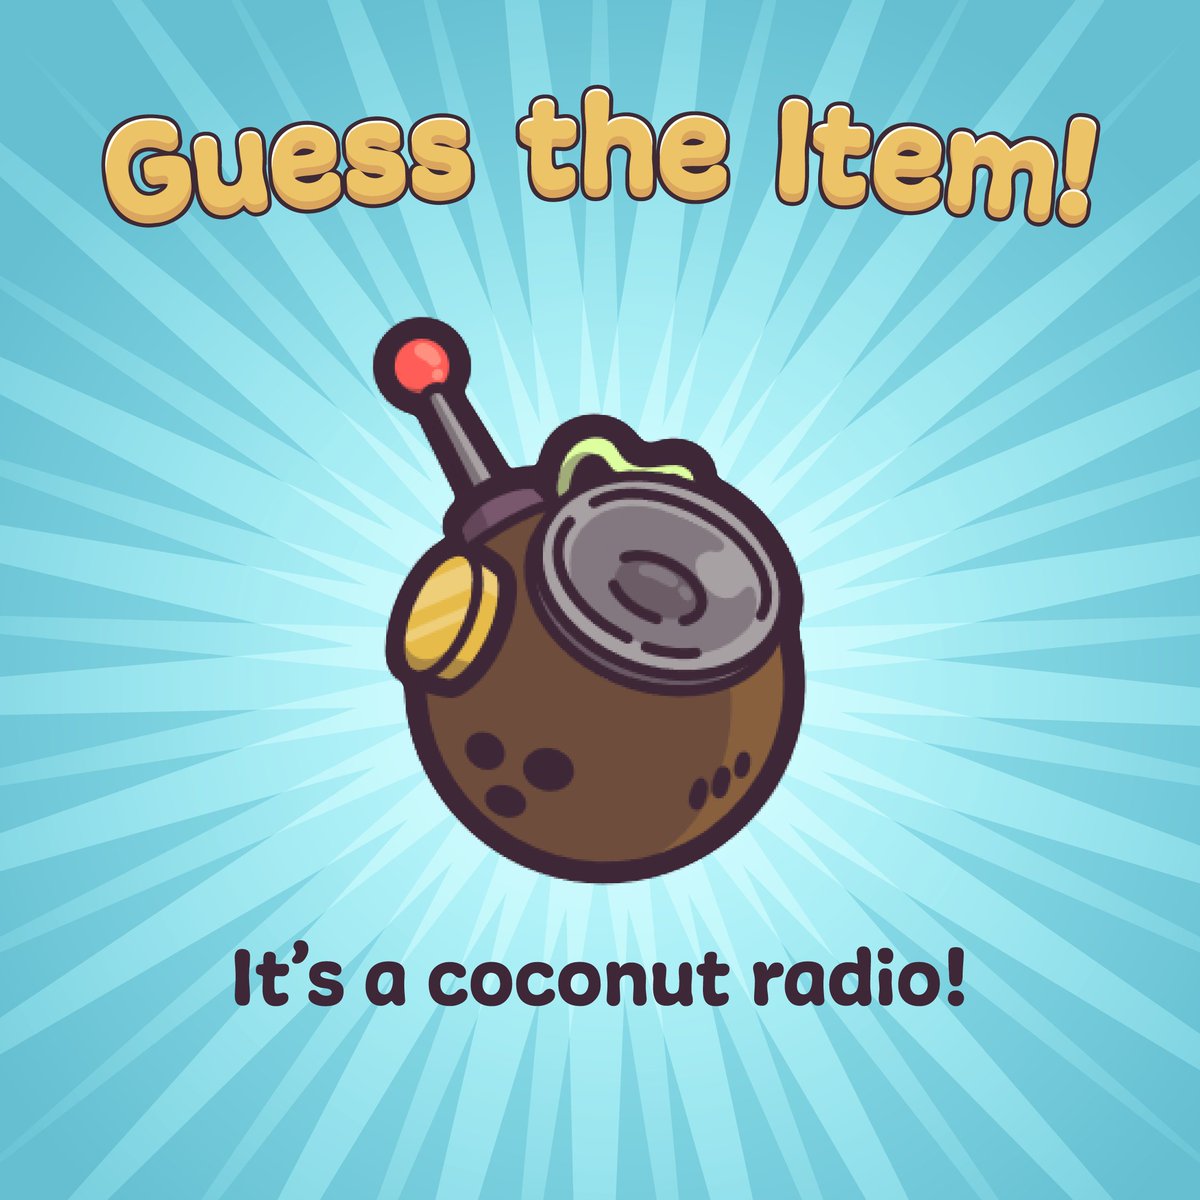 Kudos to those that got it right! Try the brand new coconut radio as well as TONS of other new updates in Castaways Beta v1.5.0! 🔗castaways.com/play